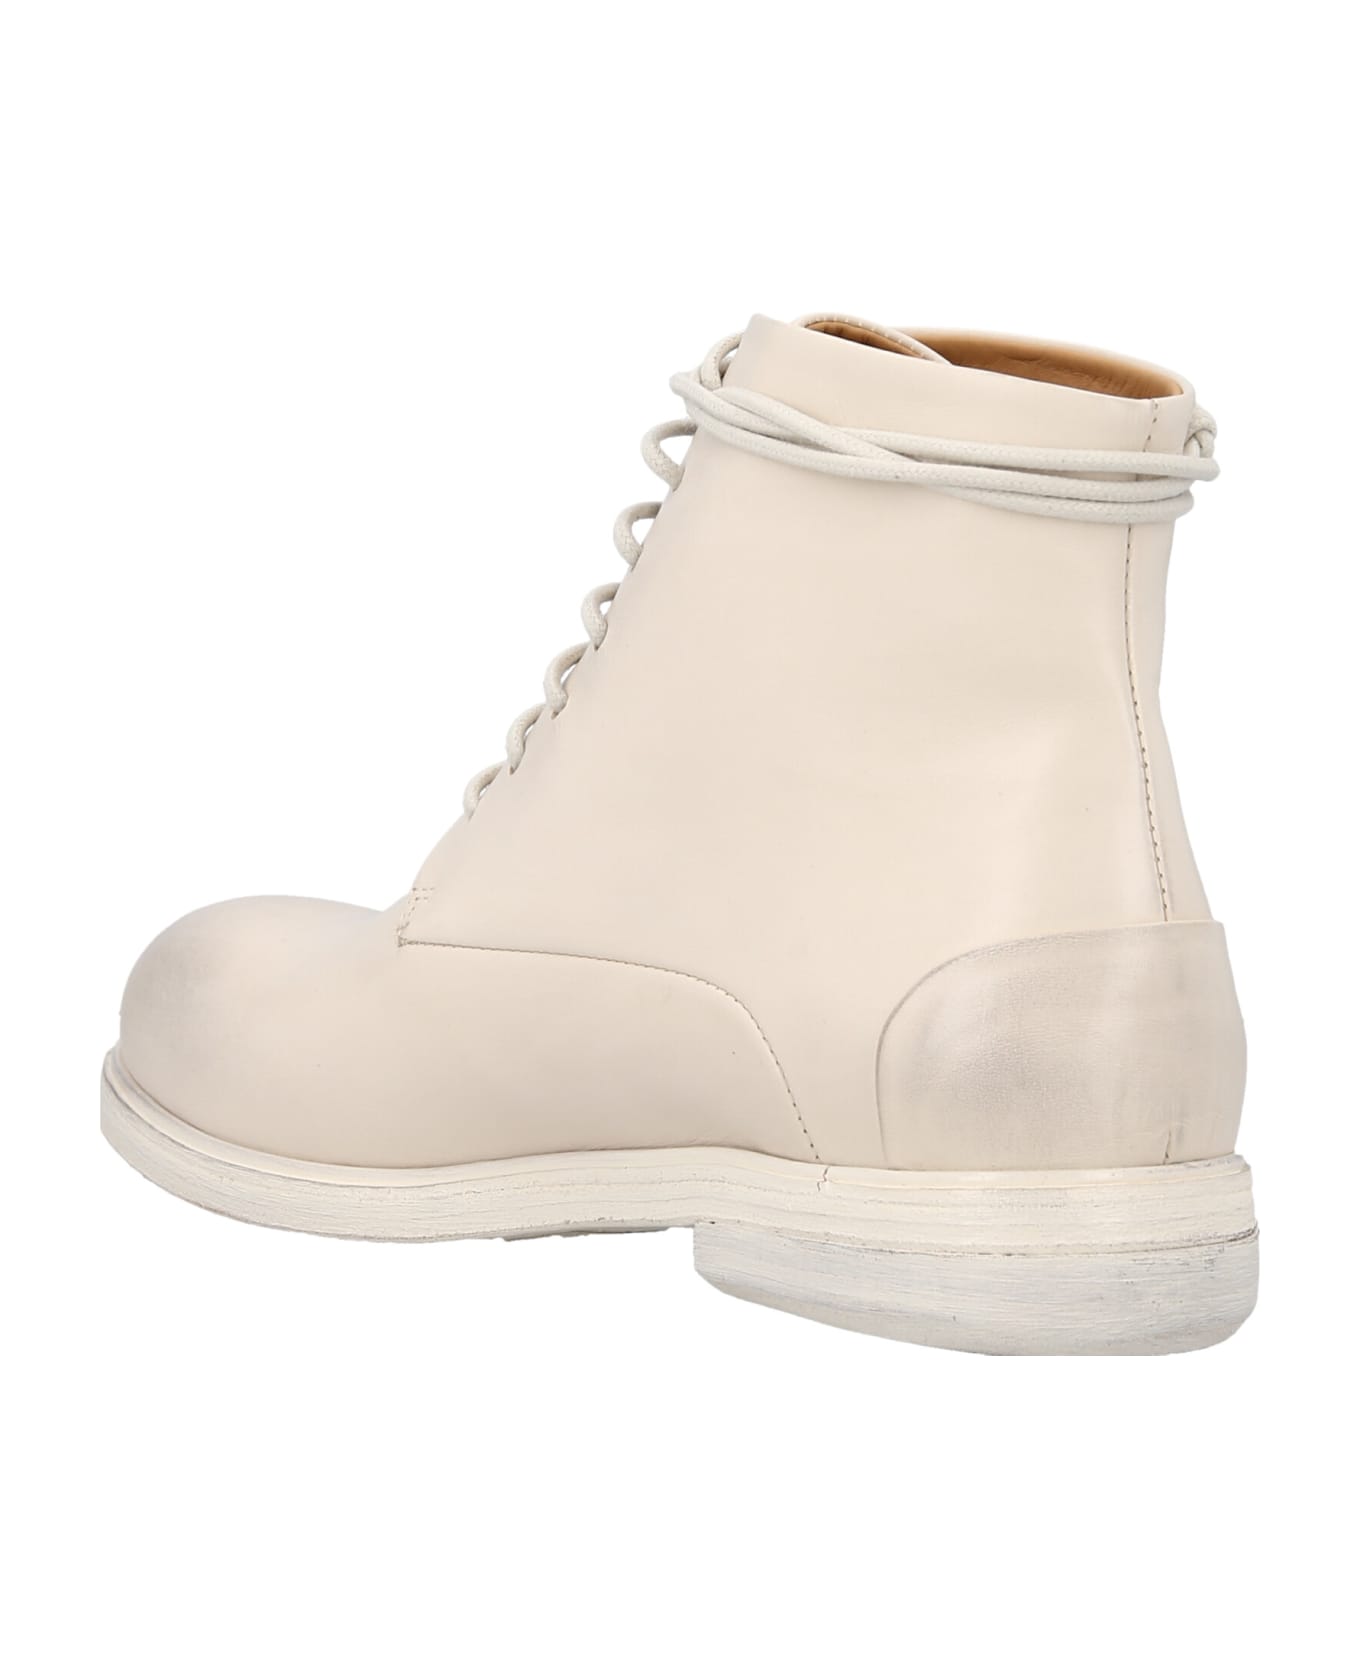 Marsell 'zucca Media' Ankle Boots - White